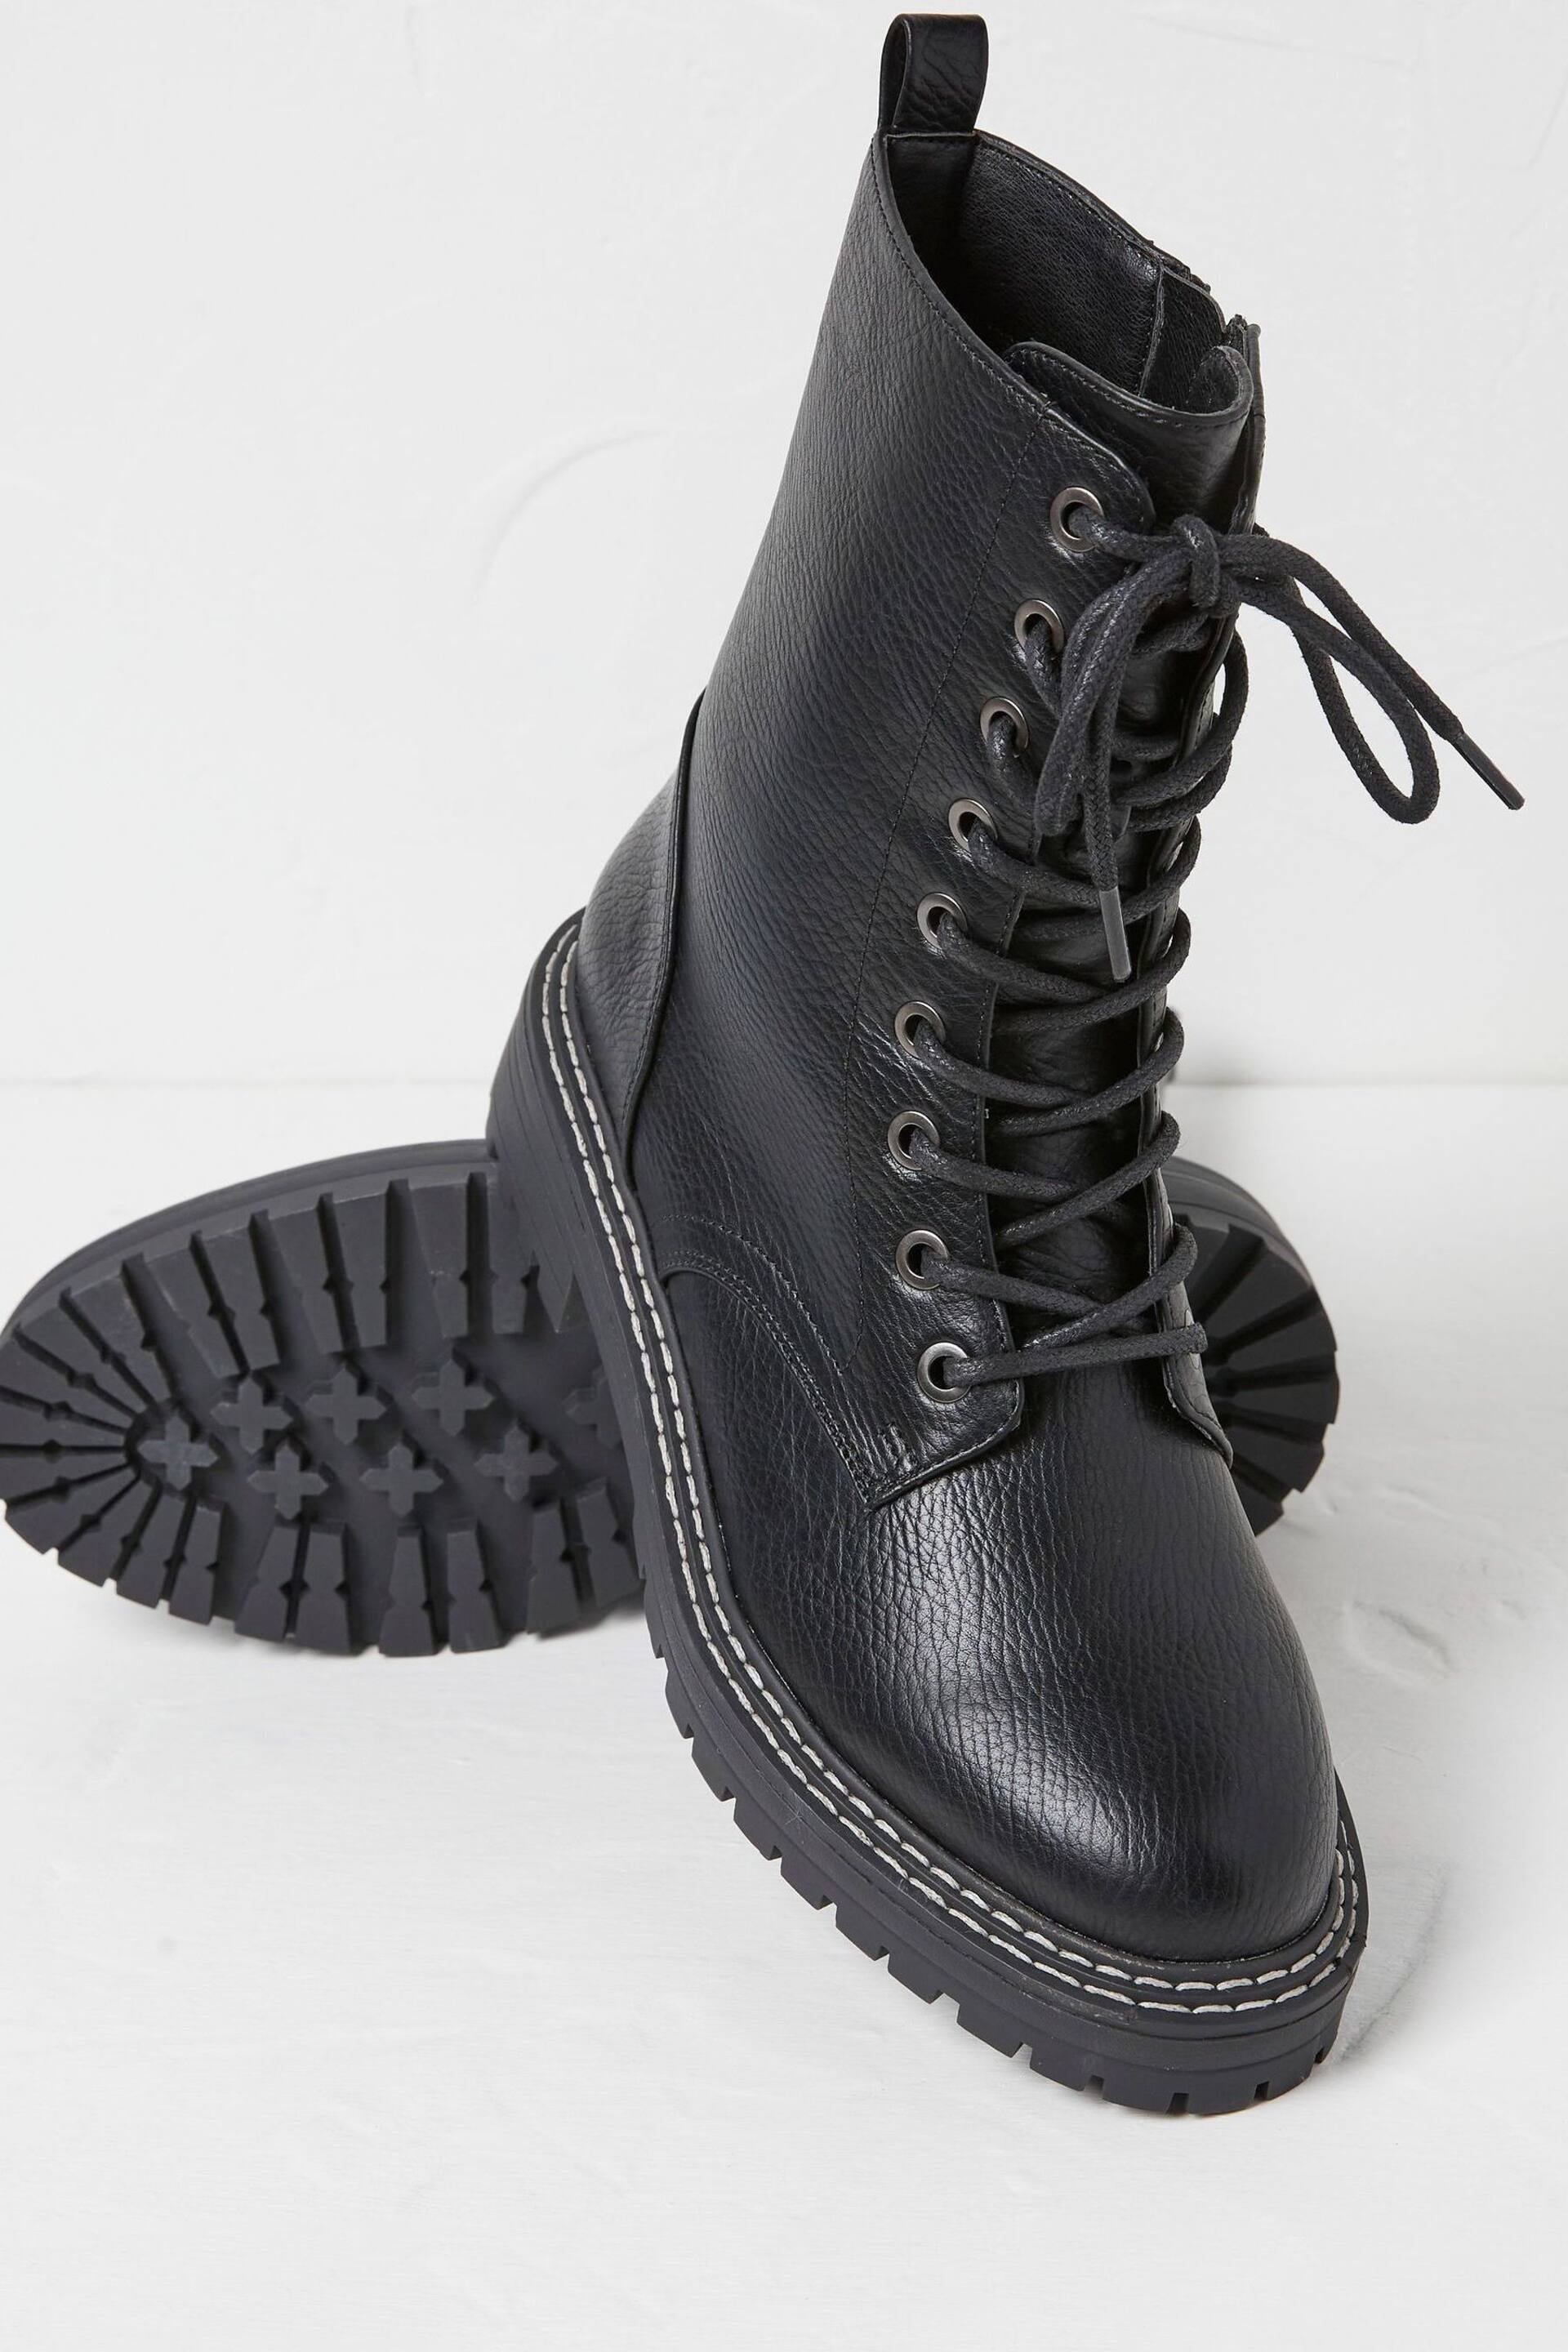 FatFace Black Violet Mid Chunky Lace Up Boots - Image 3 of 4